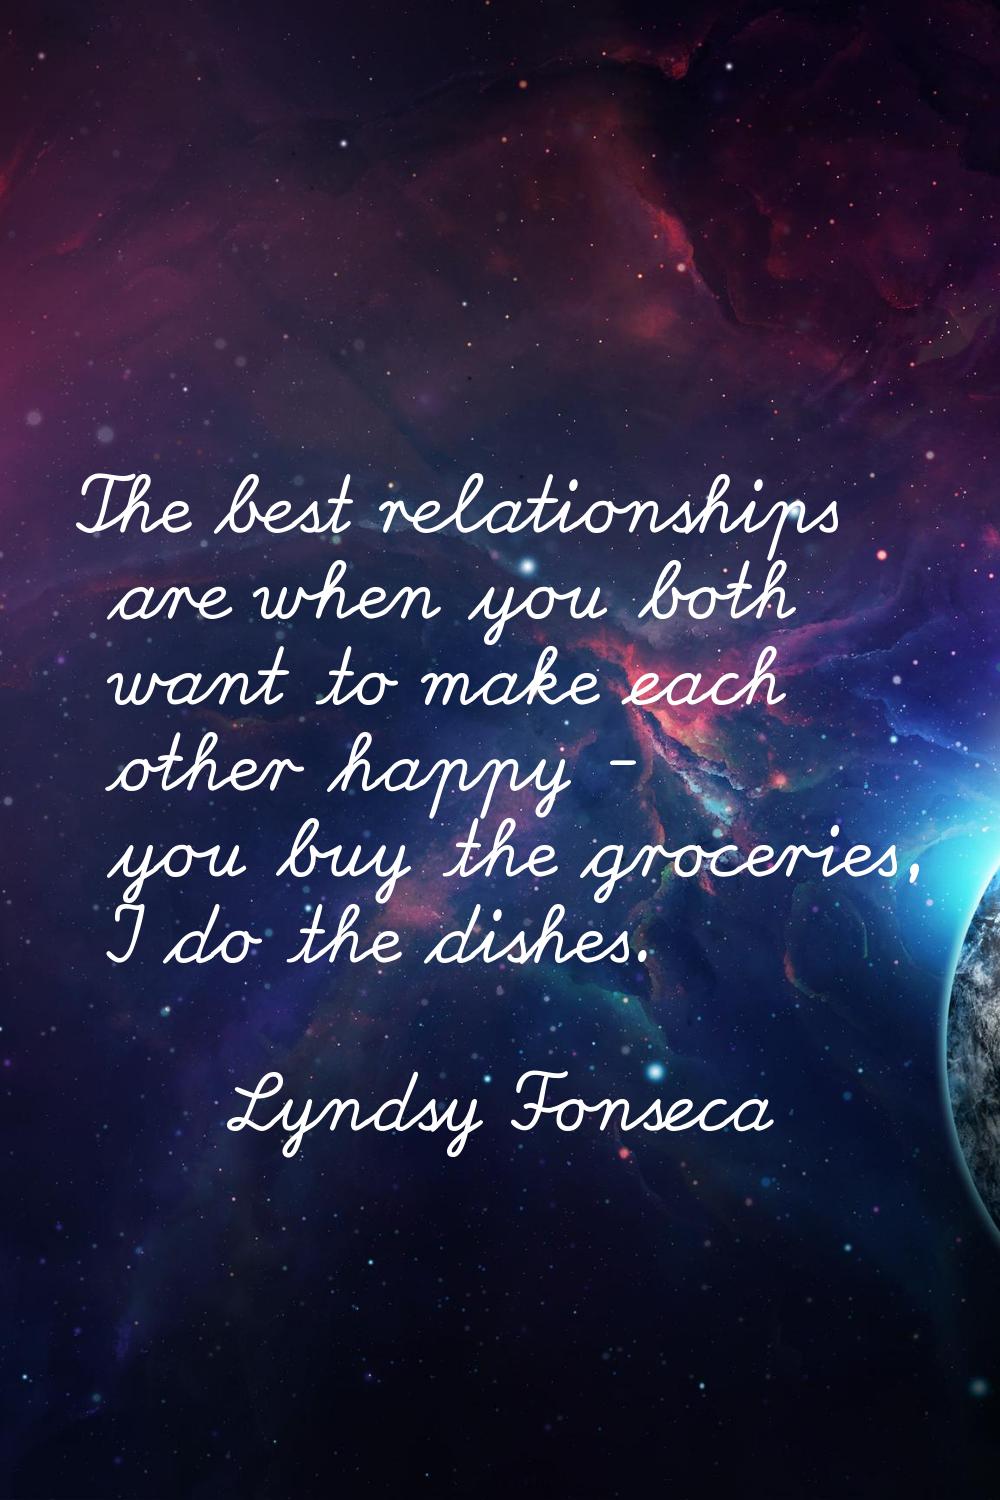 The best relationships are when you both want to make each other happy - you buy the groceries, I d